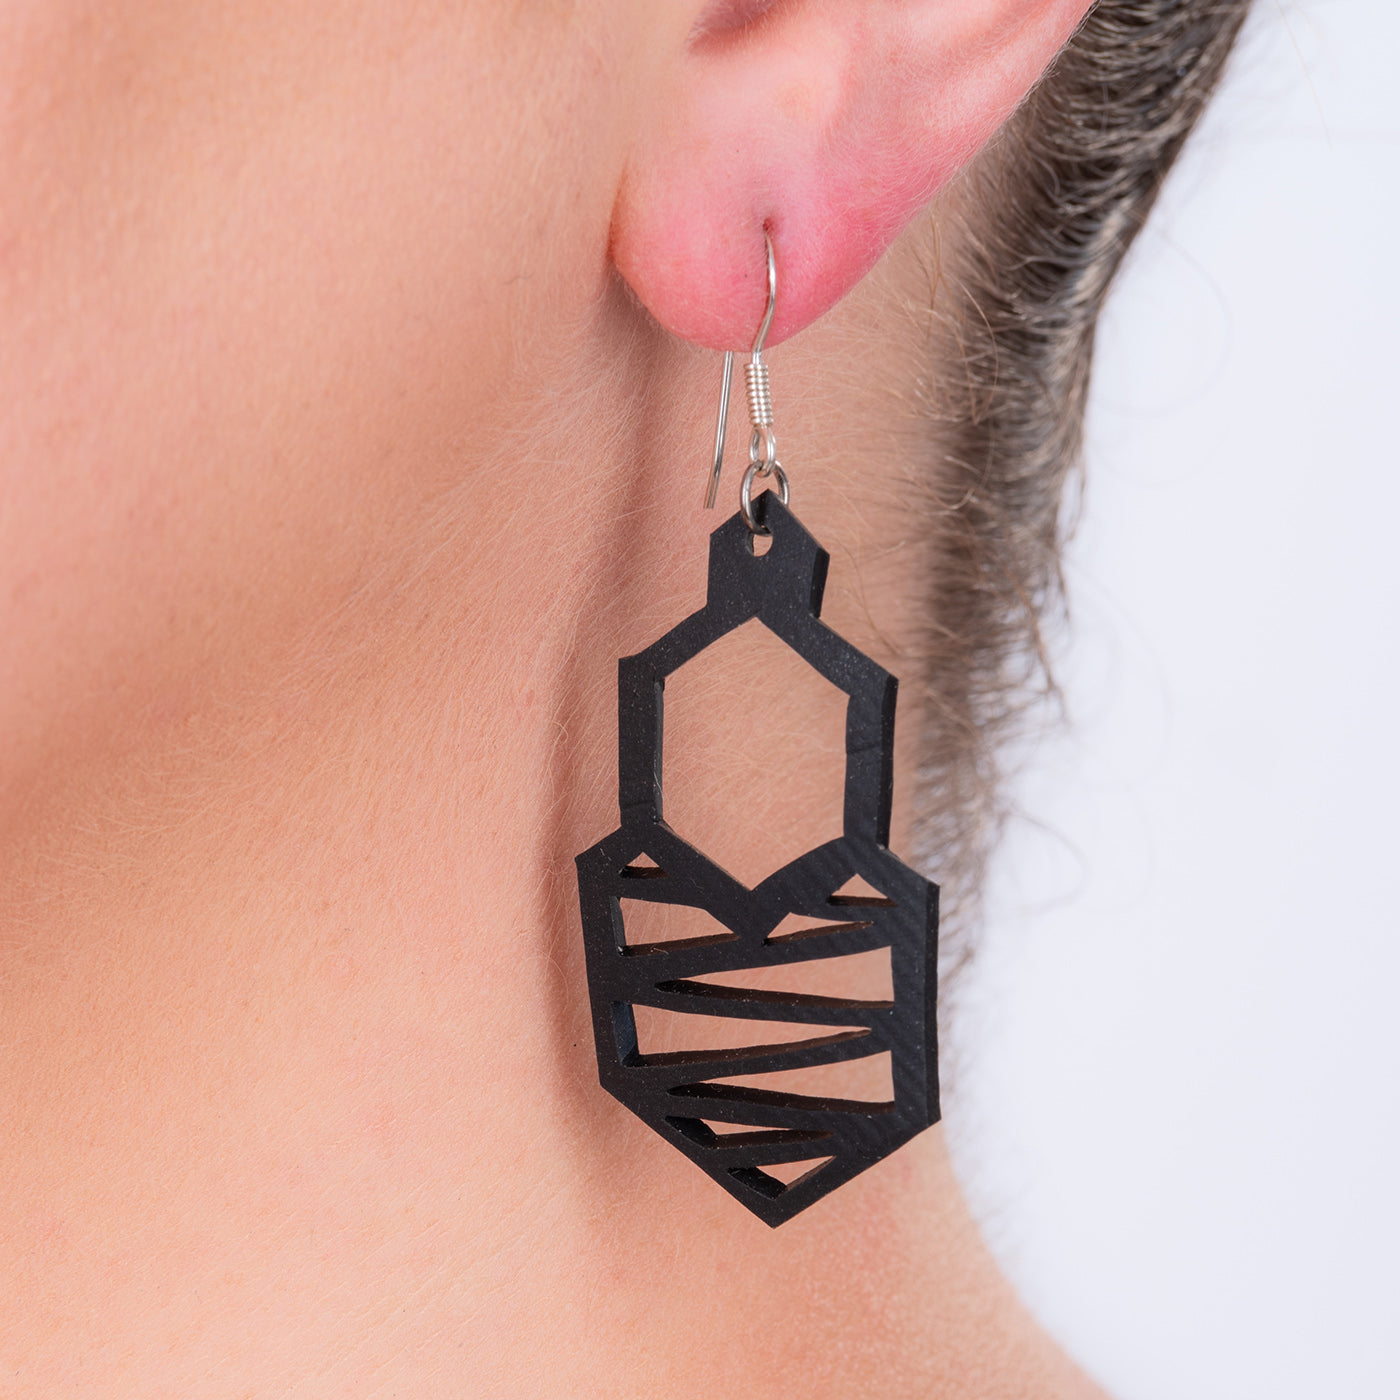 Honeycomb Handmade Rubber Earrings by Paguro Upcycle